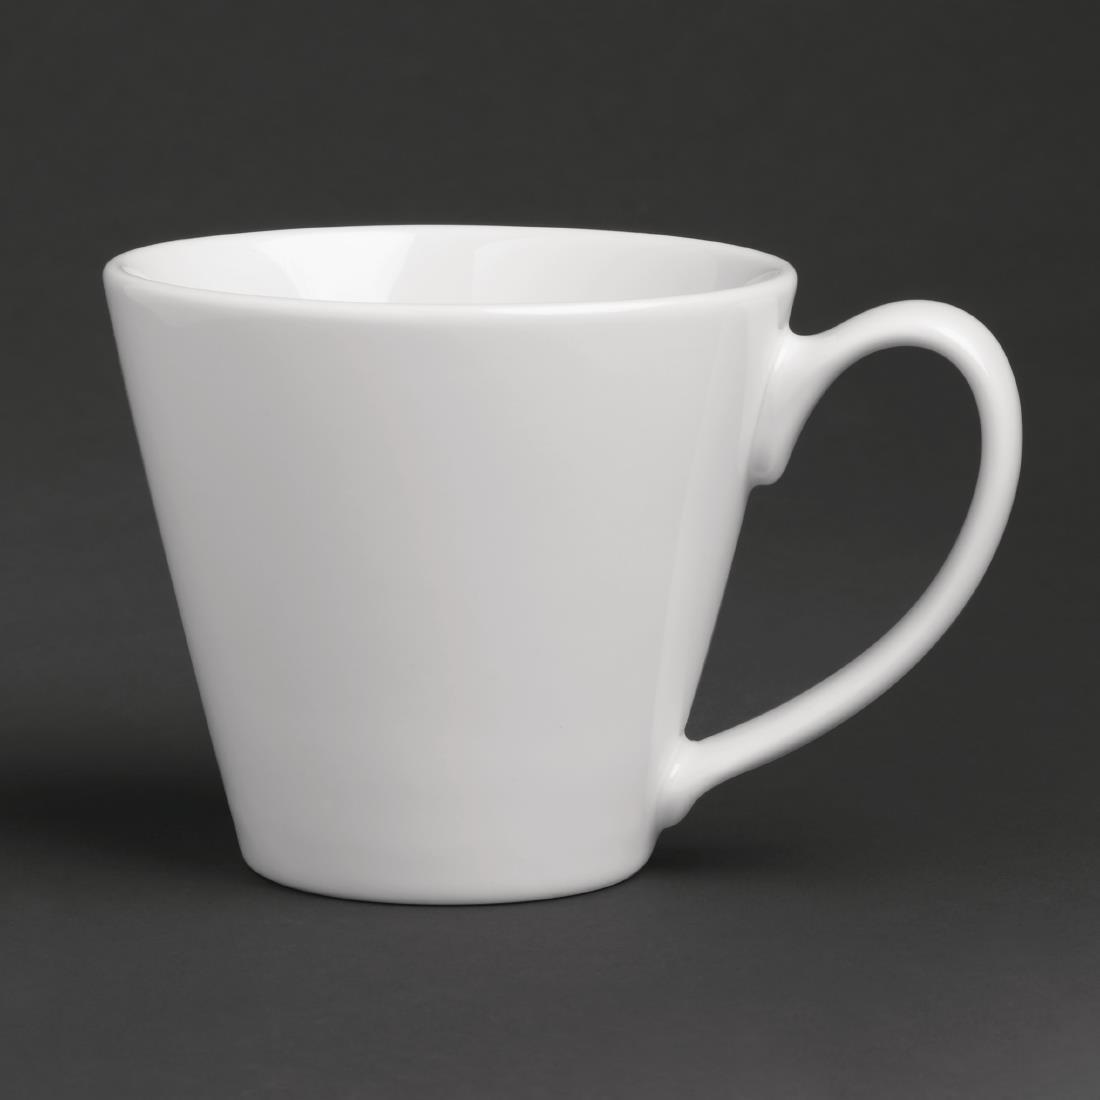 Royal Porcelain Classic White Tea Cup 210ml (Pack of 12) - GT927  - 1